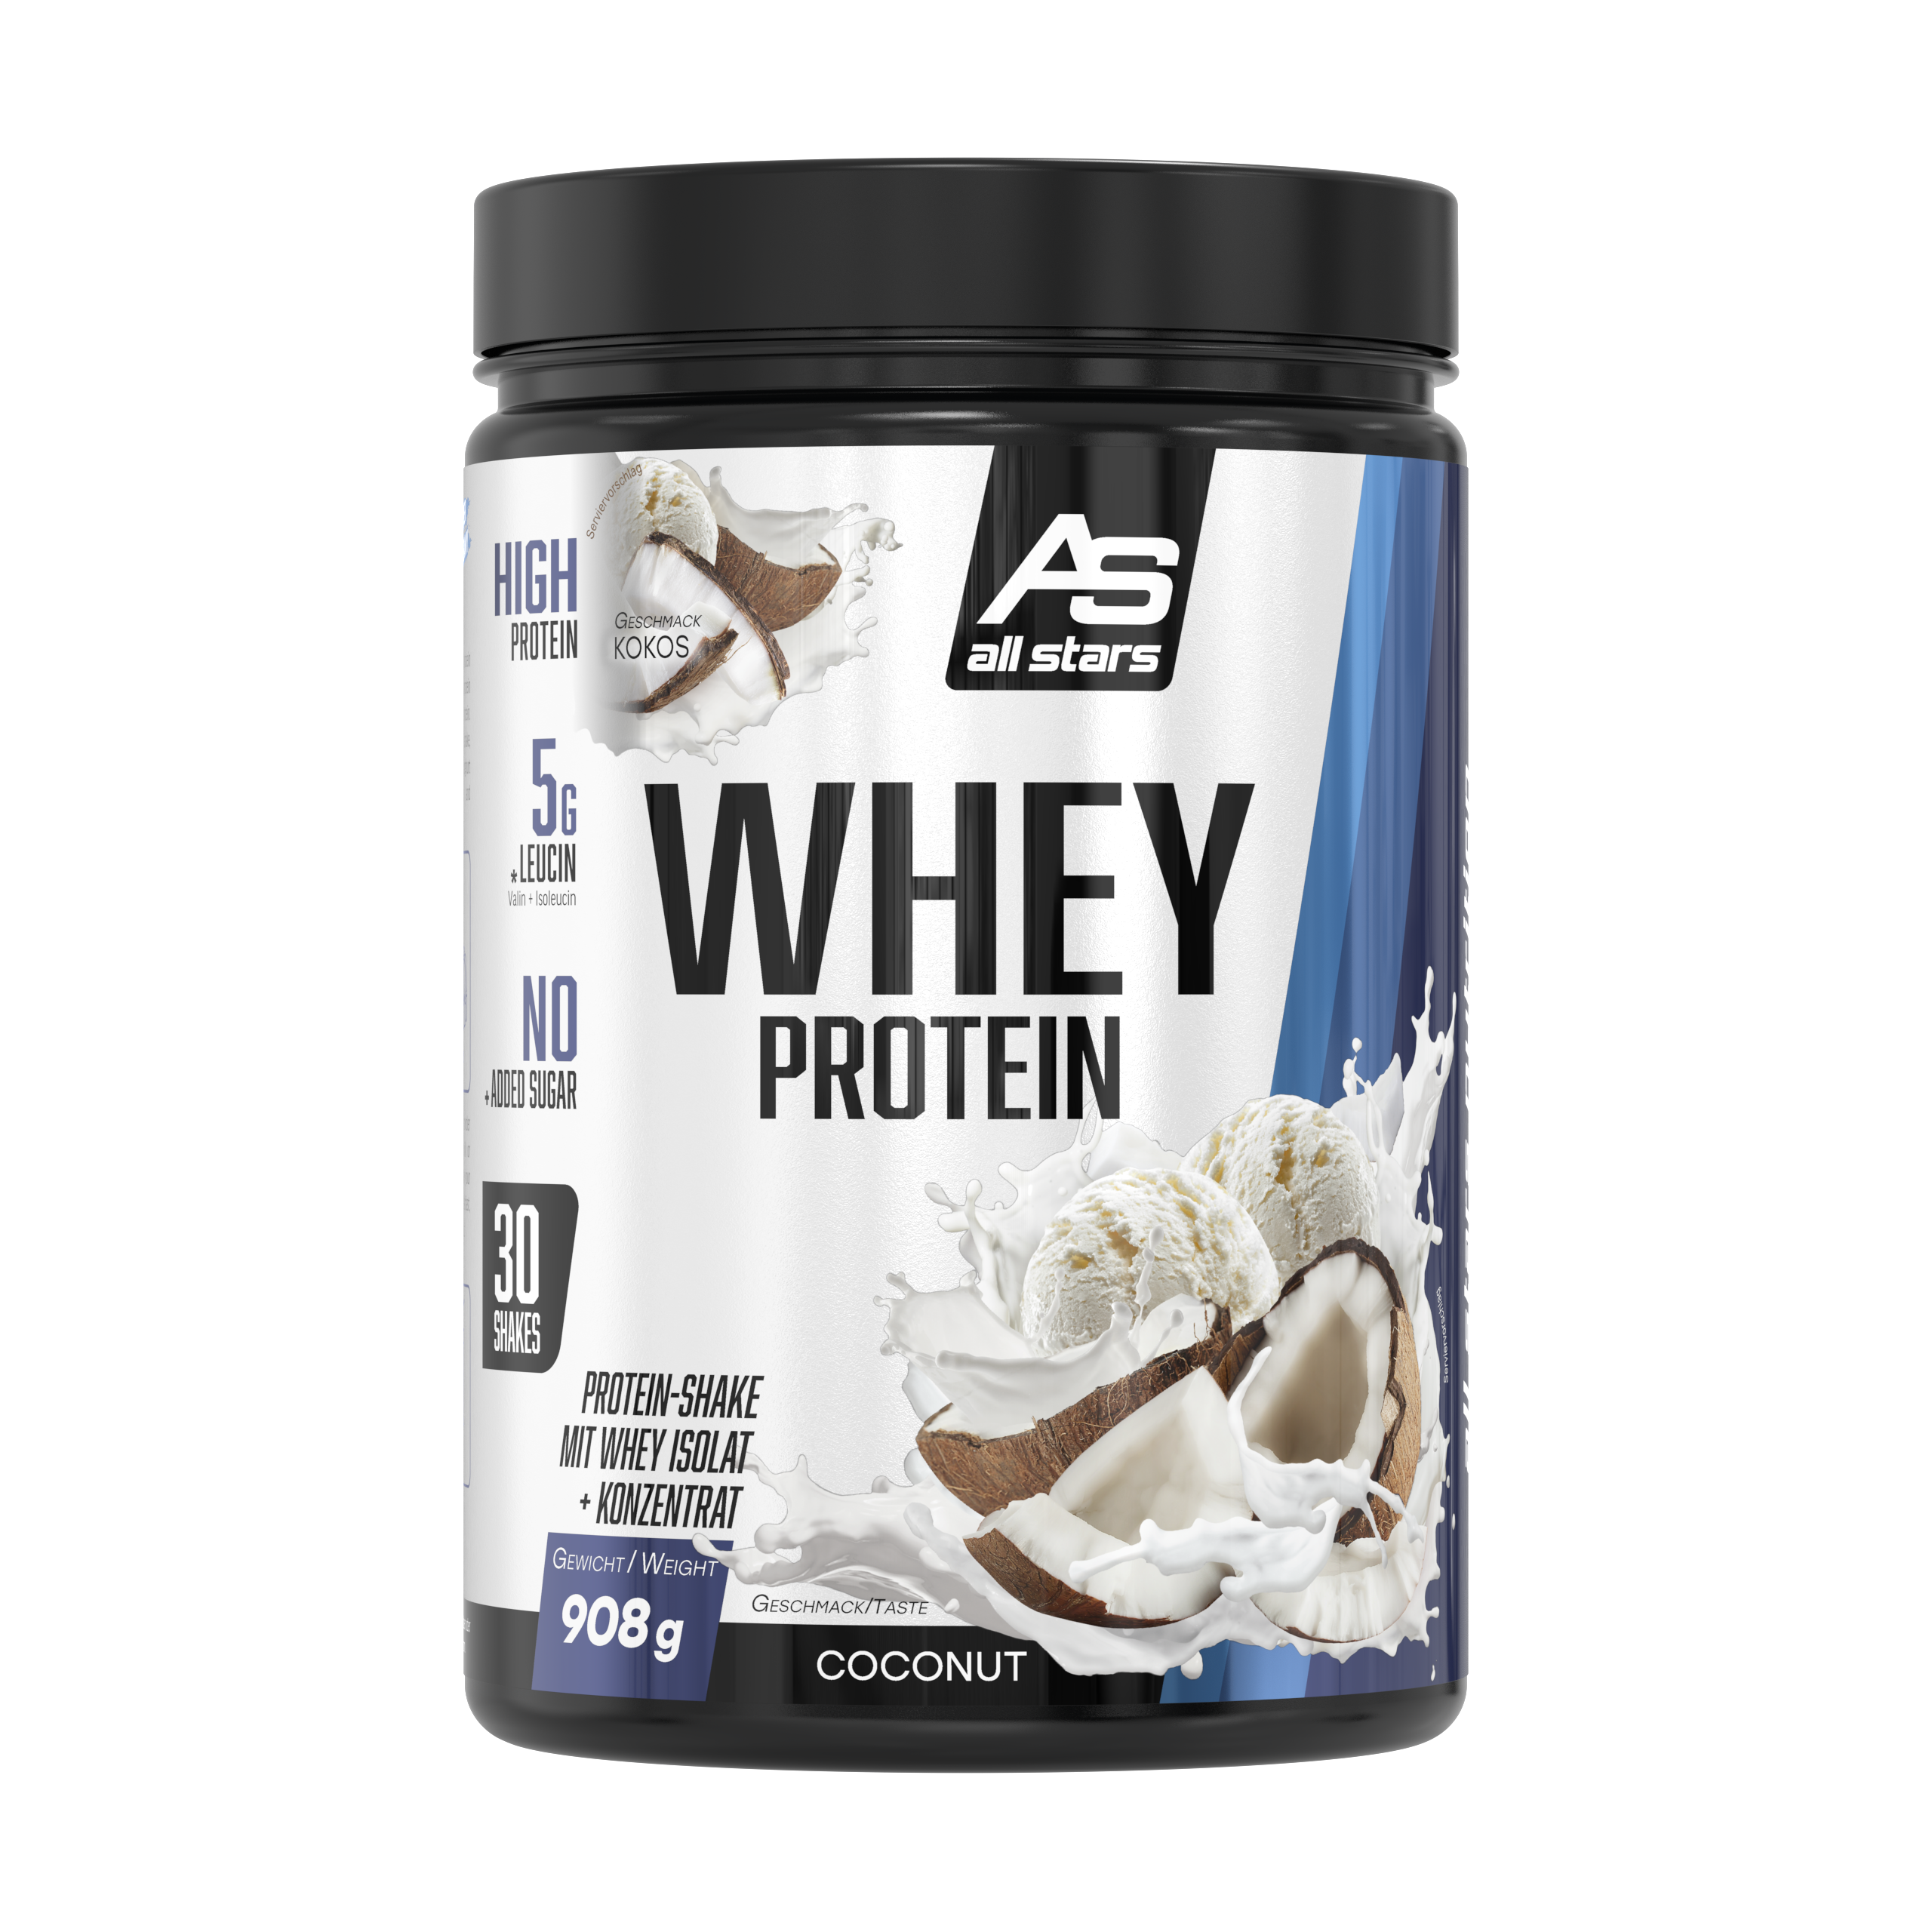 ALL STARS Whey Protein - 908g Dose